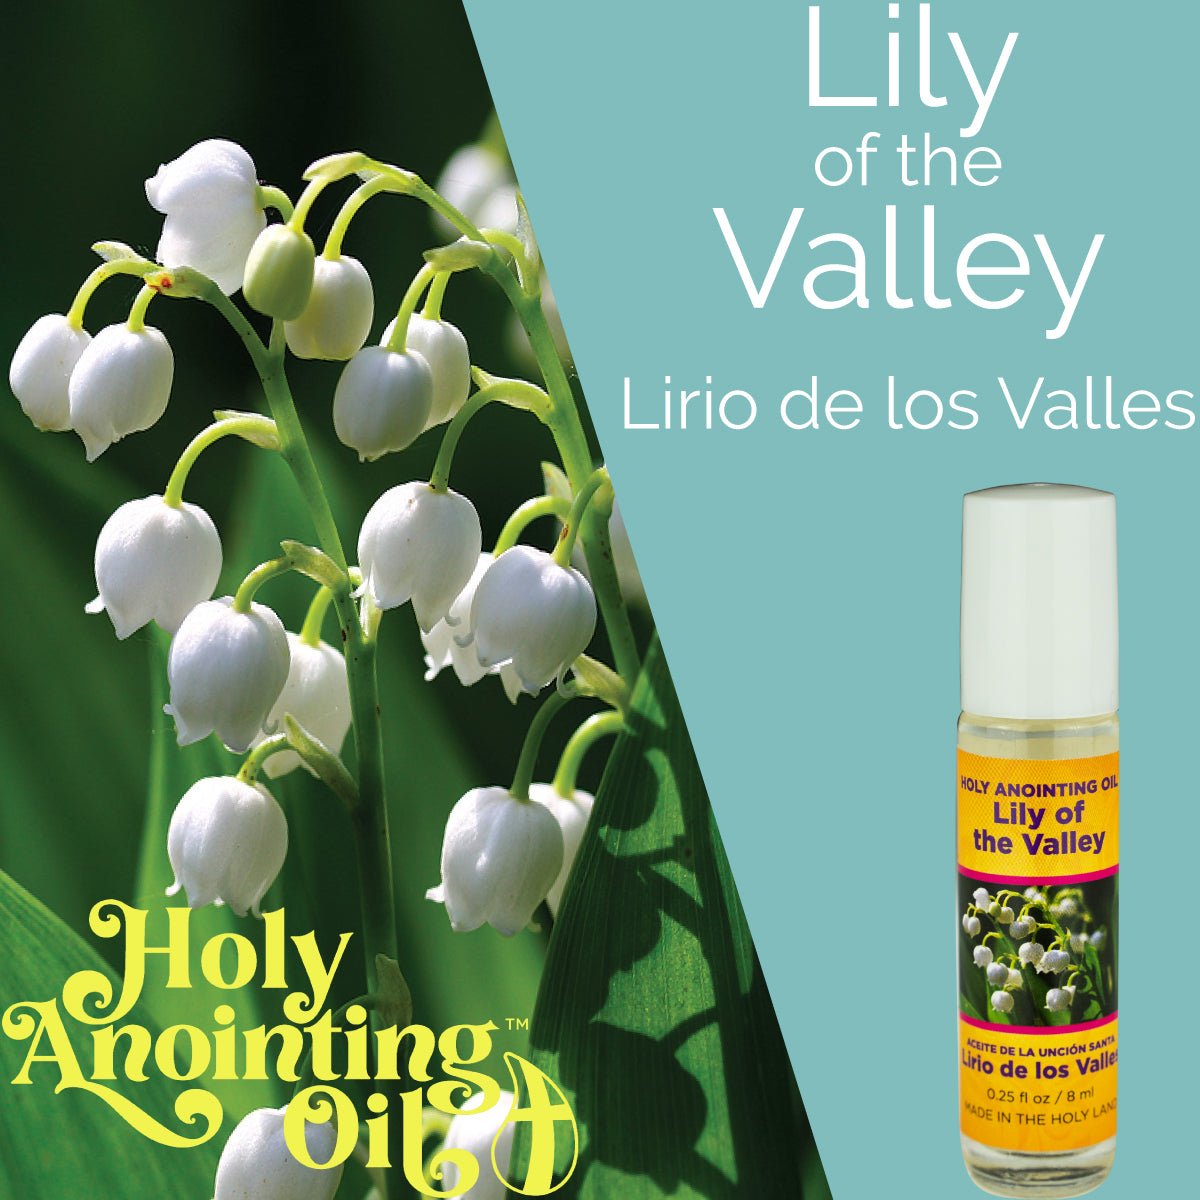 Lily of the Valley Anointing Oil from Israel, Deluxe Gift Box Set - Silver